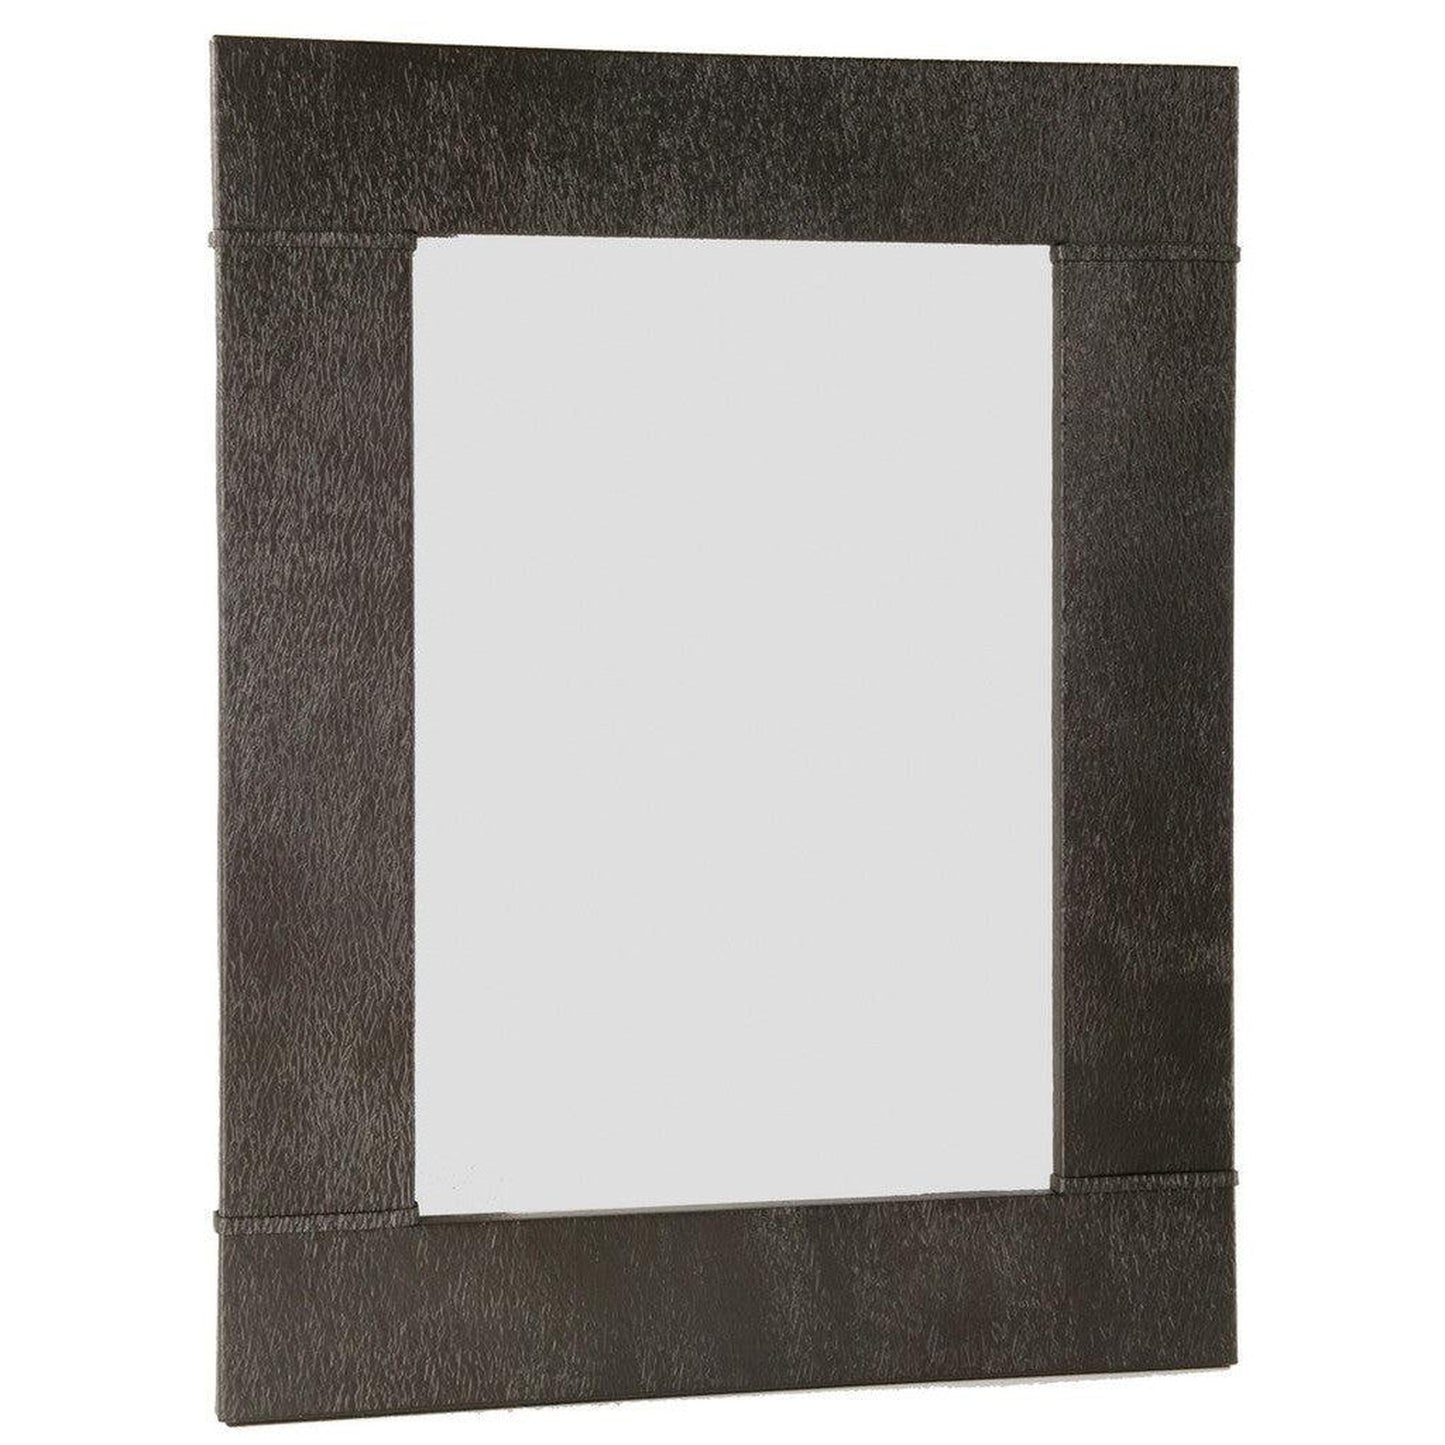 Stone County Ironworks Cedarvale 31" x 35" Small Woodland Brown Iron Wall Mirror With Gold Iron Accent